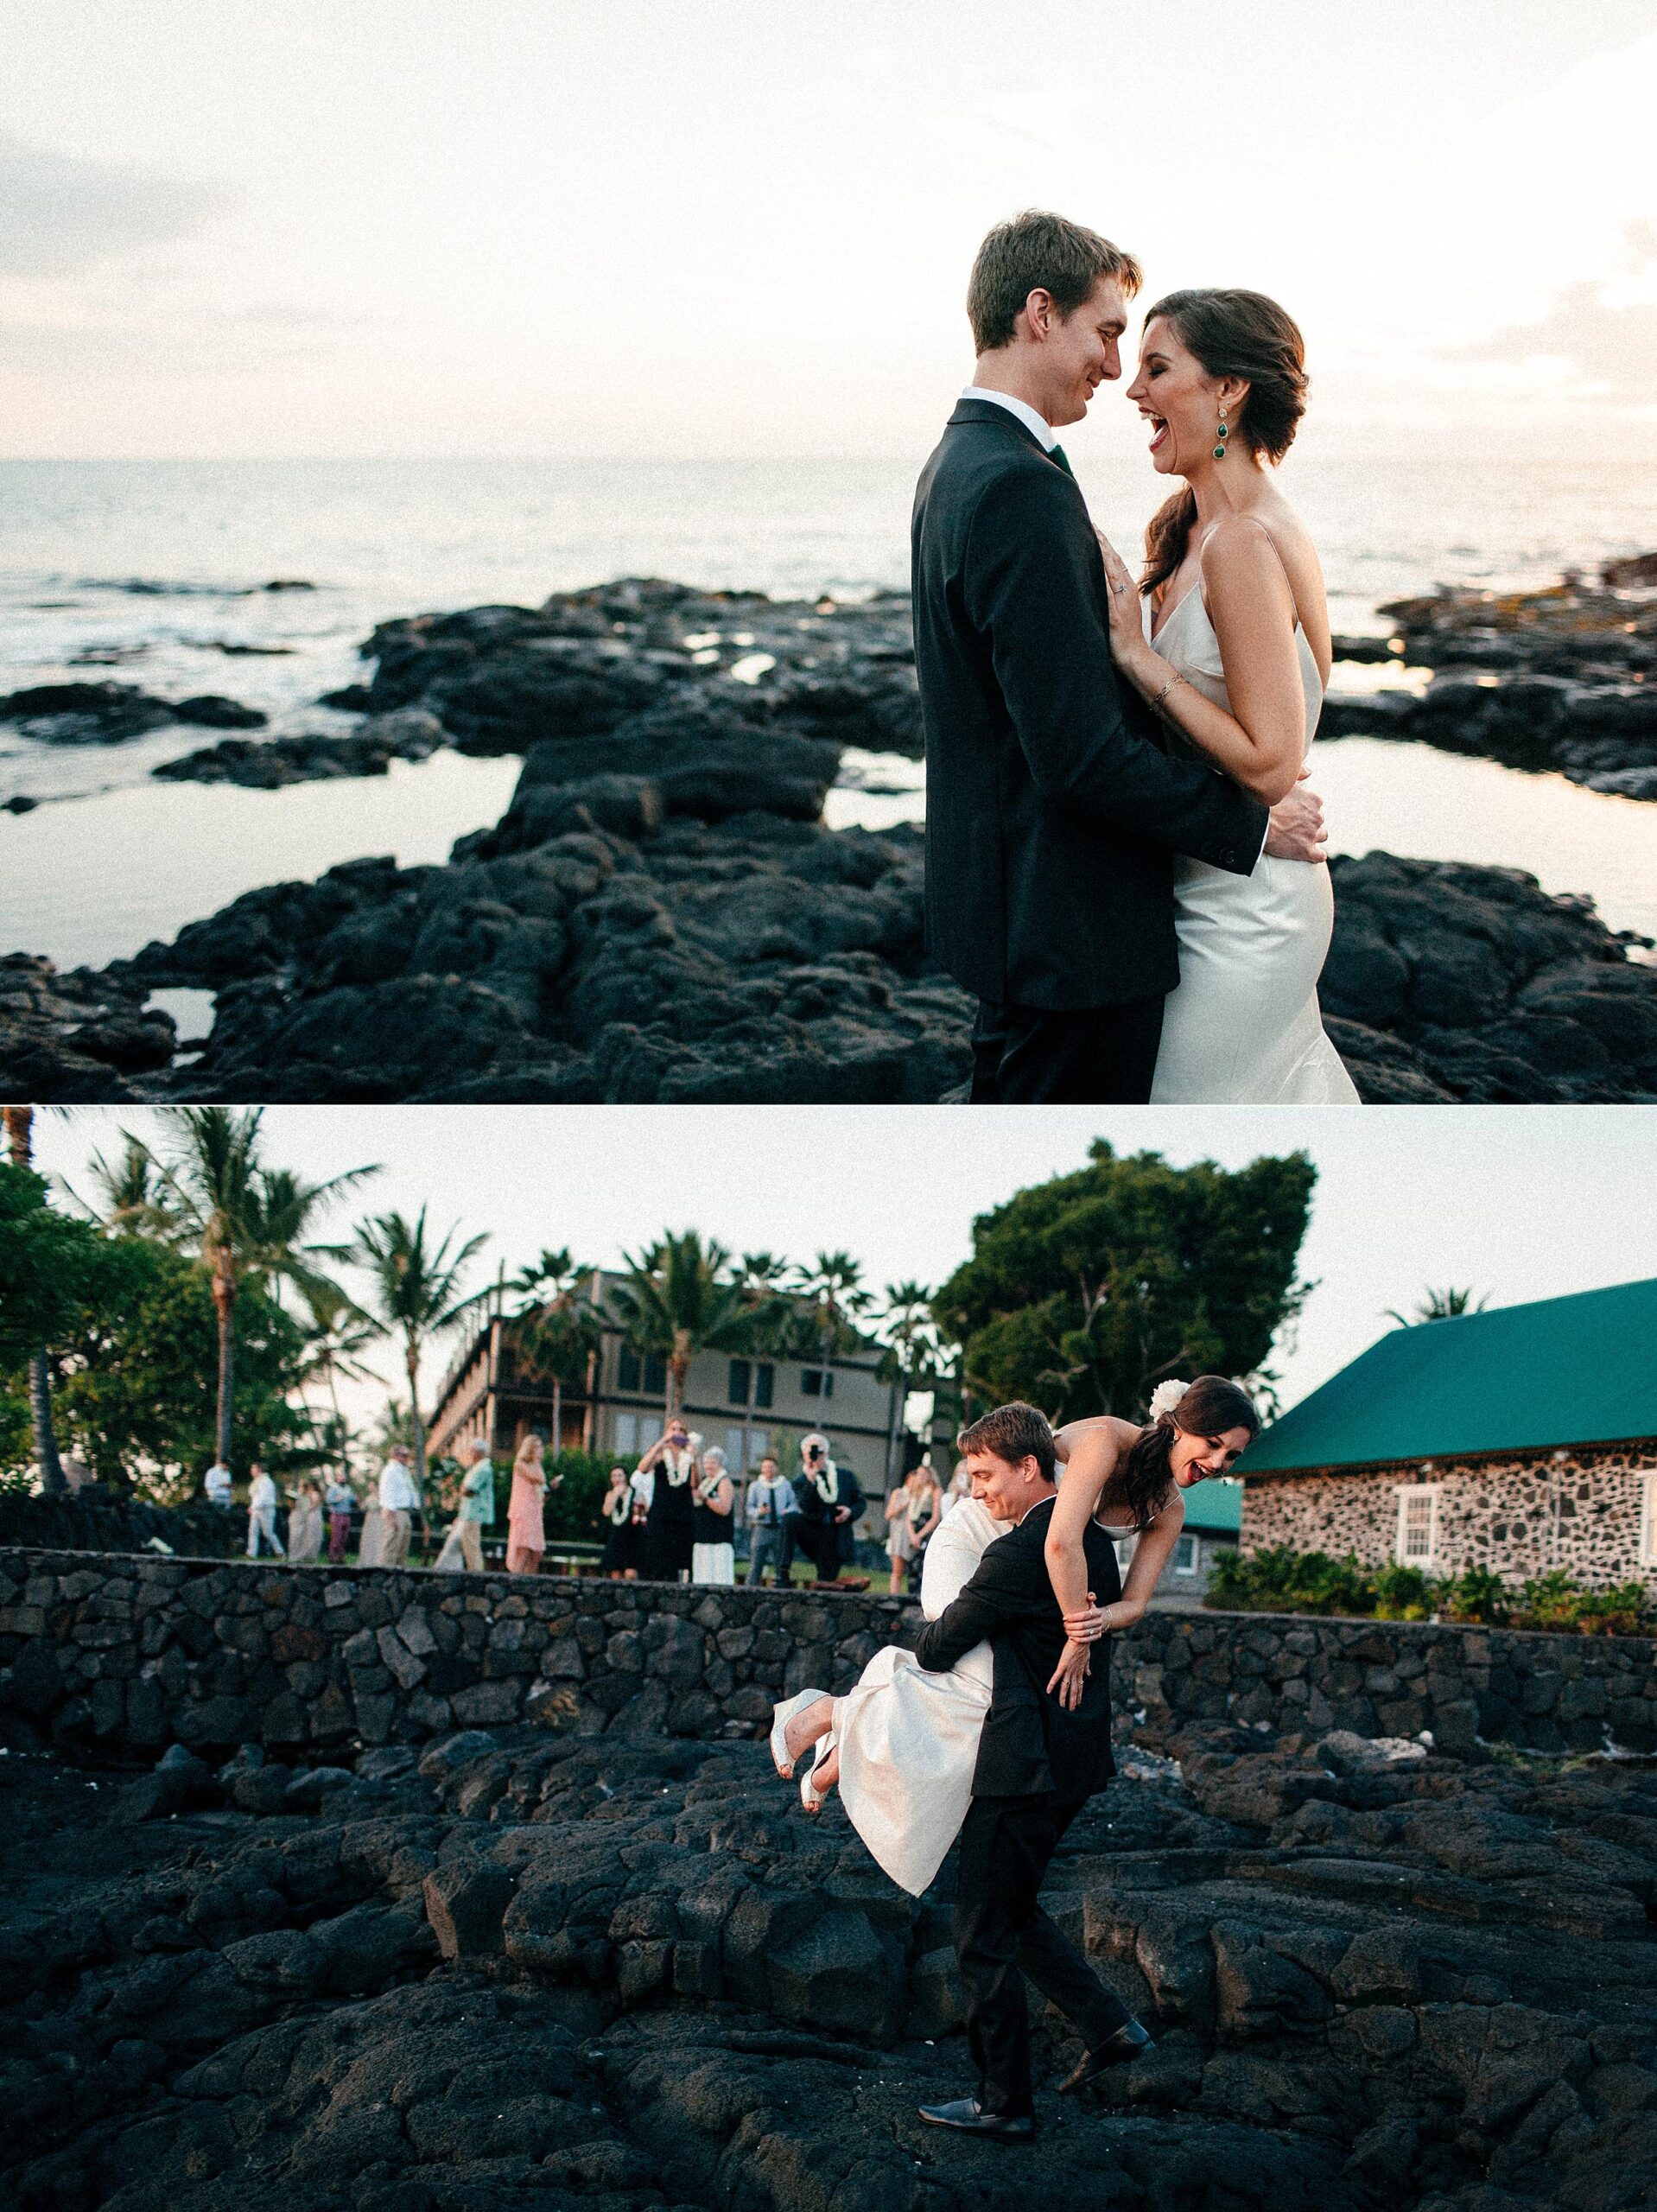 Kona-Big-Island-Hawaii-New-Years-Eve-Wedding-with-Ceremony-at-Living-Stones-Church-and-Reception-at-Daylight-Mind-Coffee_0022.jpg